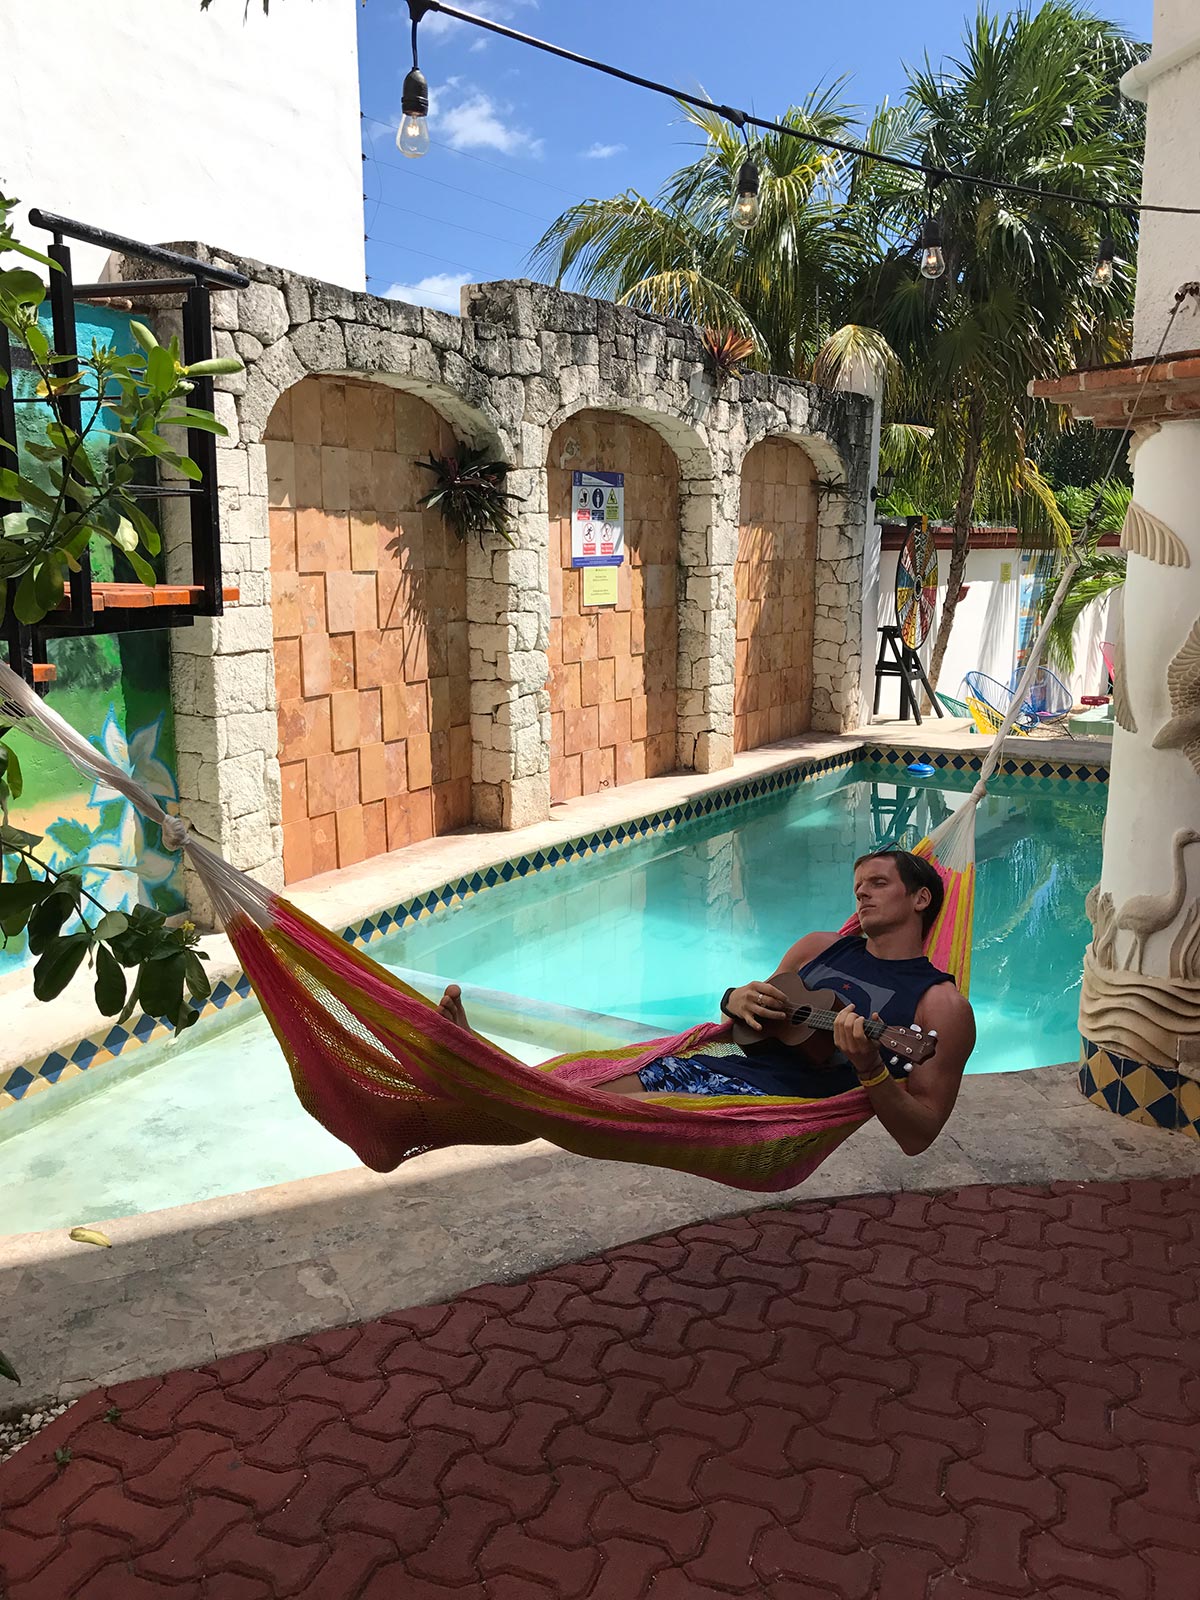 David Simpson on a hammock with ukulele by the pool in Cancun, Mexico. Chichén Itzá and the Yucatán coast